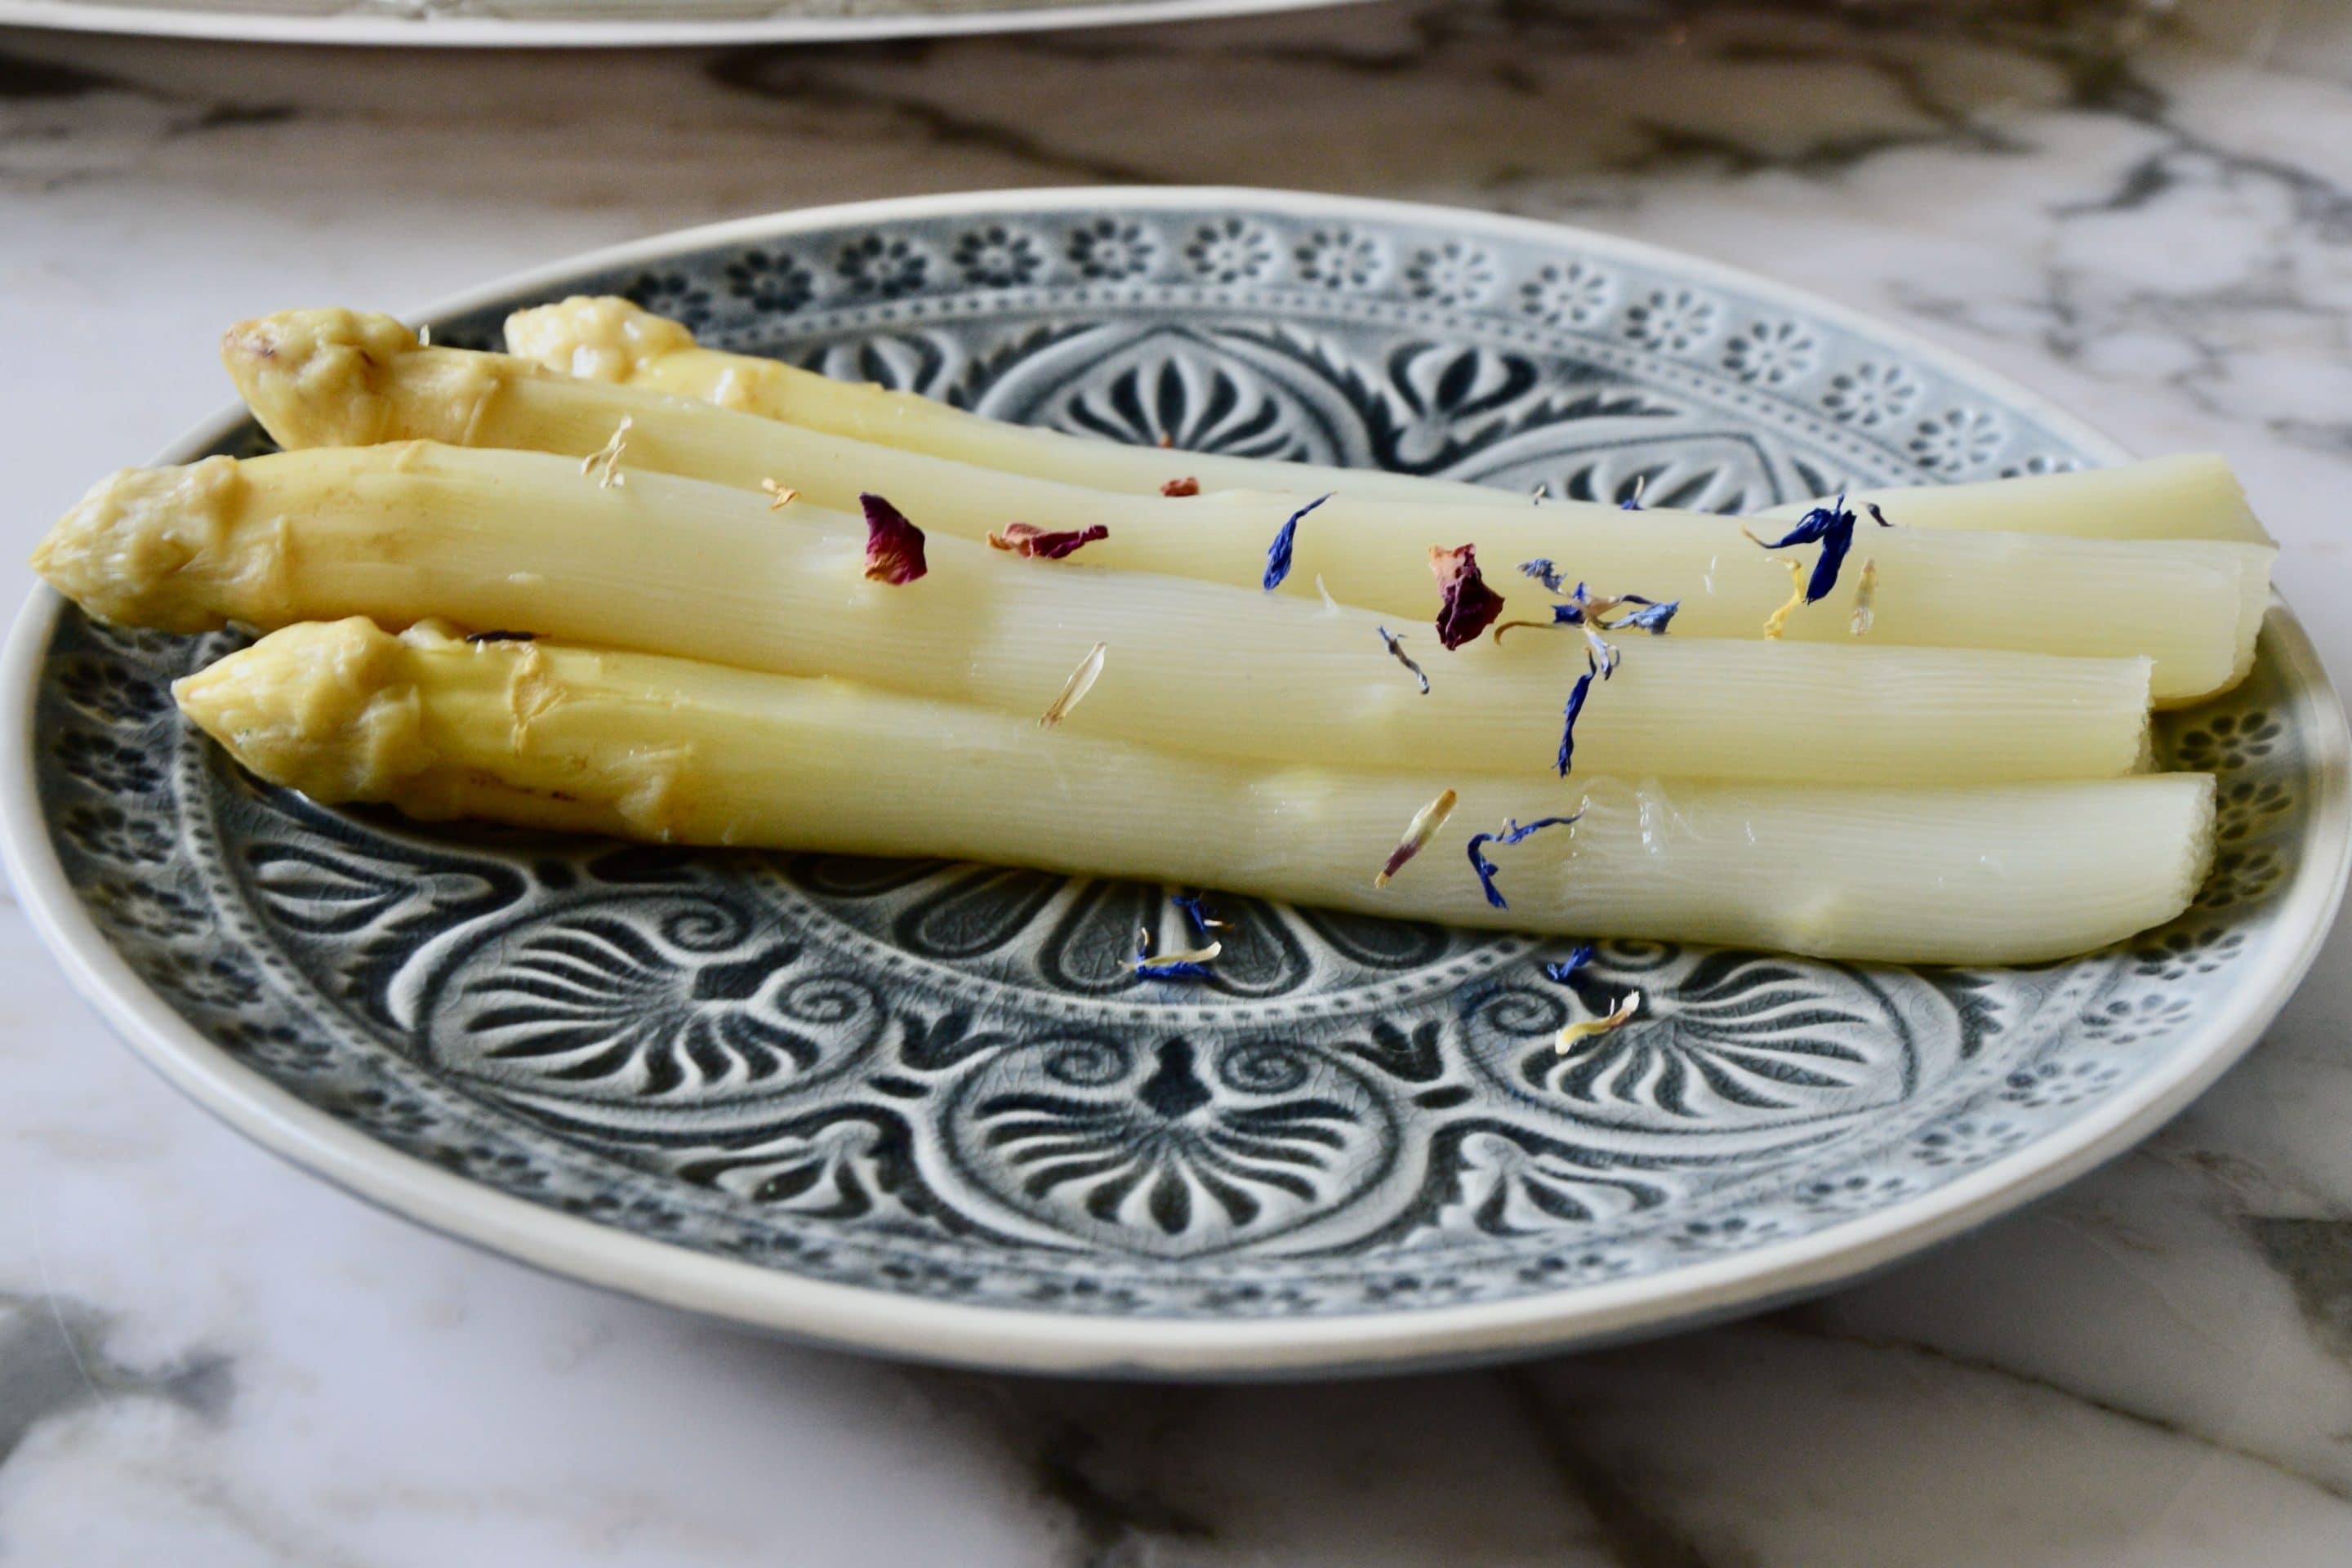 How to cook white asparagus